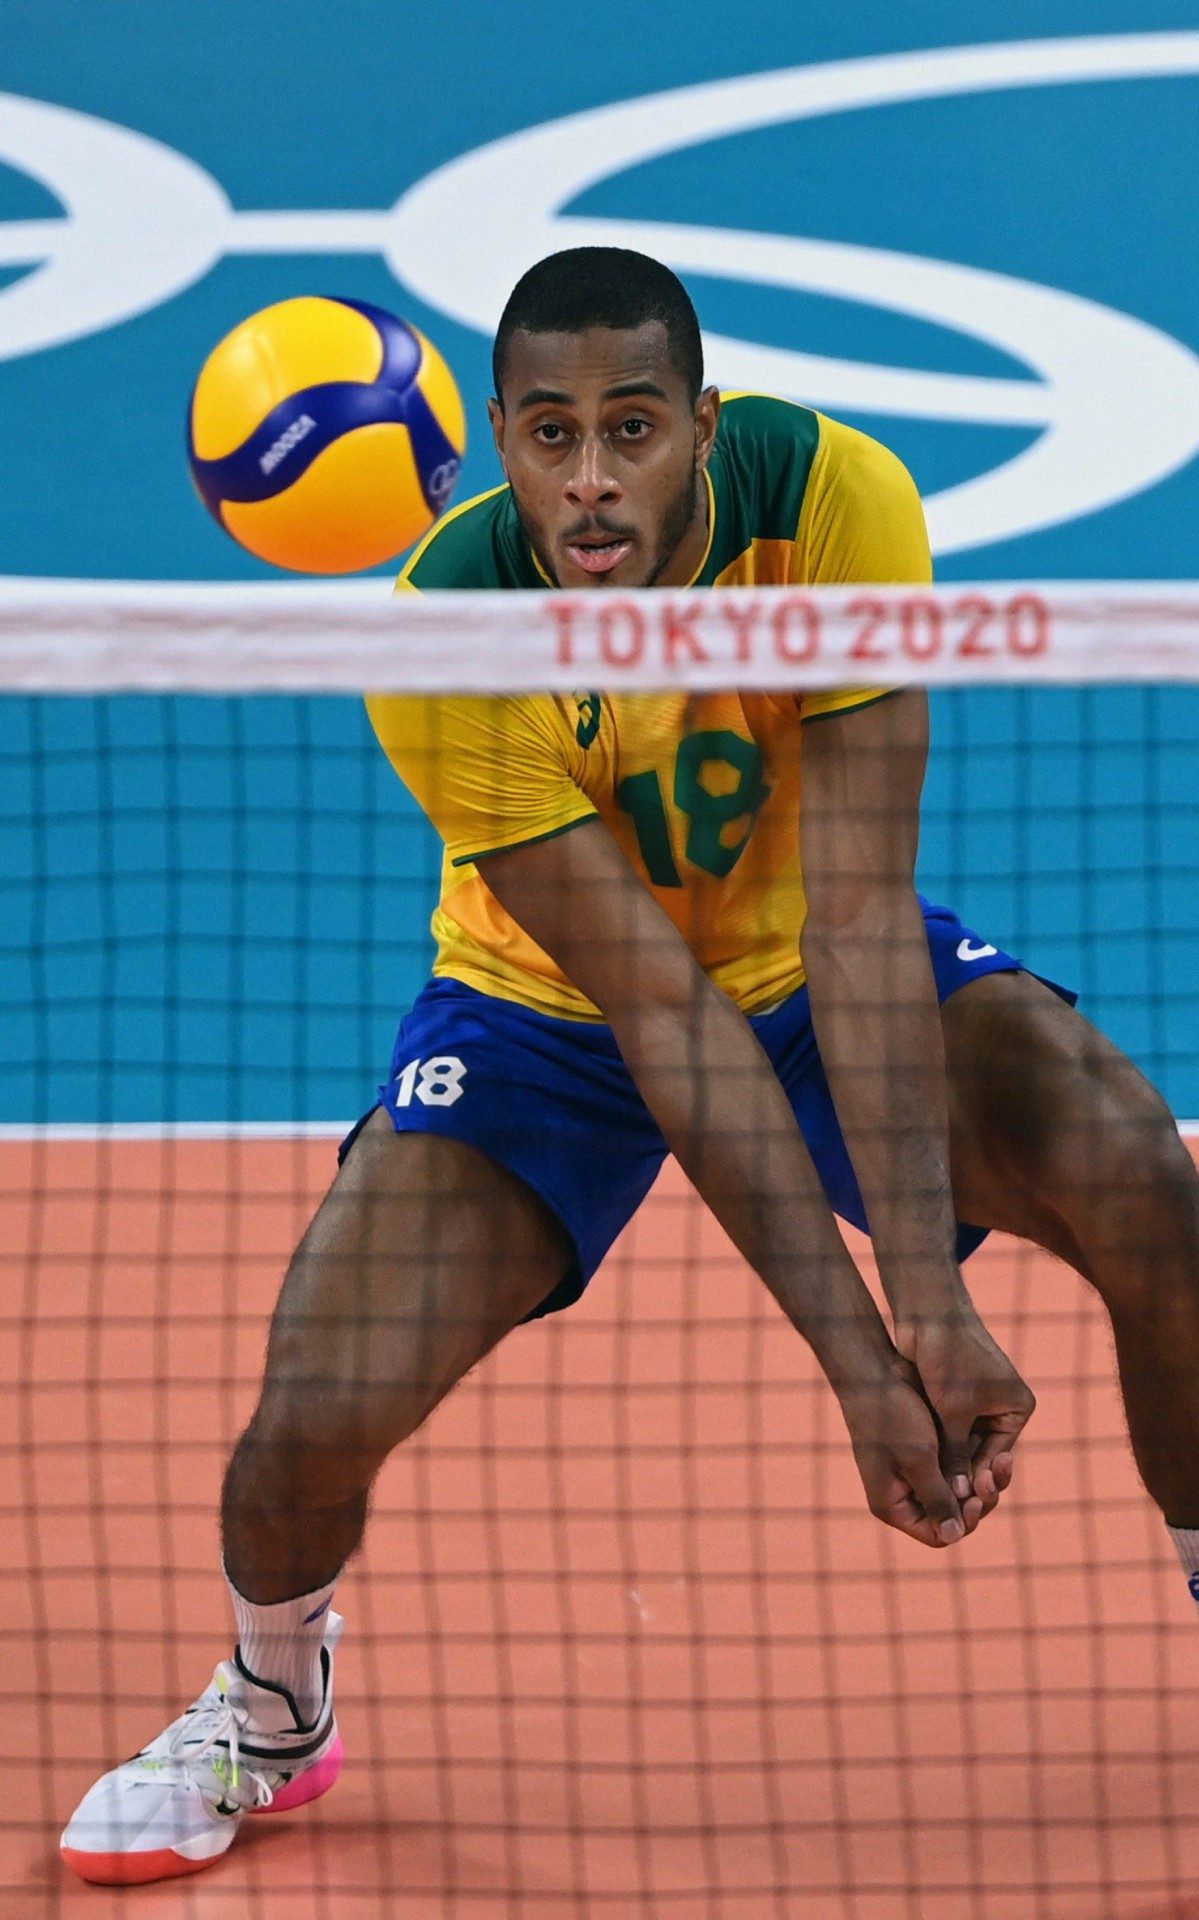 Brazil's Ricardo Souza hits the ball in the men's quarter-final volleyball match between Japan and Brazil during the Tokyo 2020 Olympic Games at Ariake Arena in Tokyo on August 3, 2021. (Photo by YURI CORTEZ / AFP) - AFP